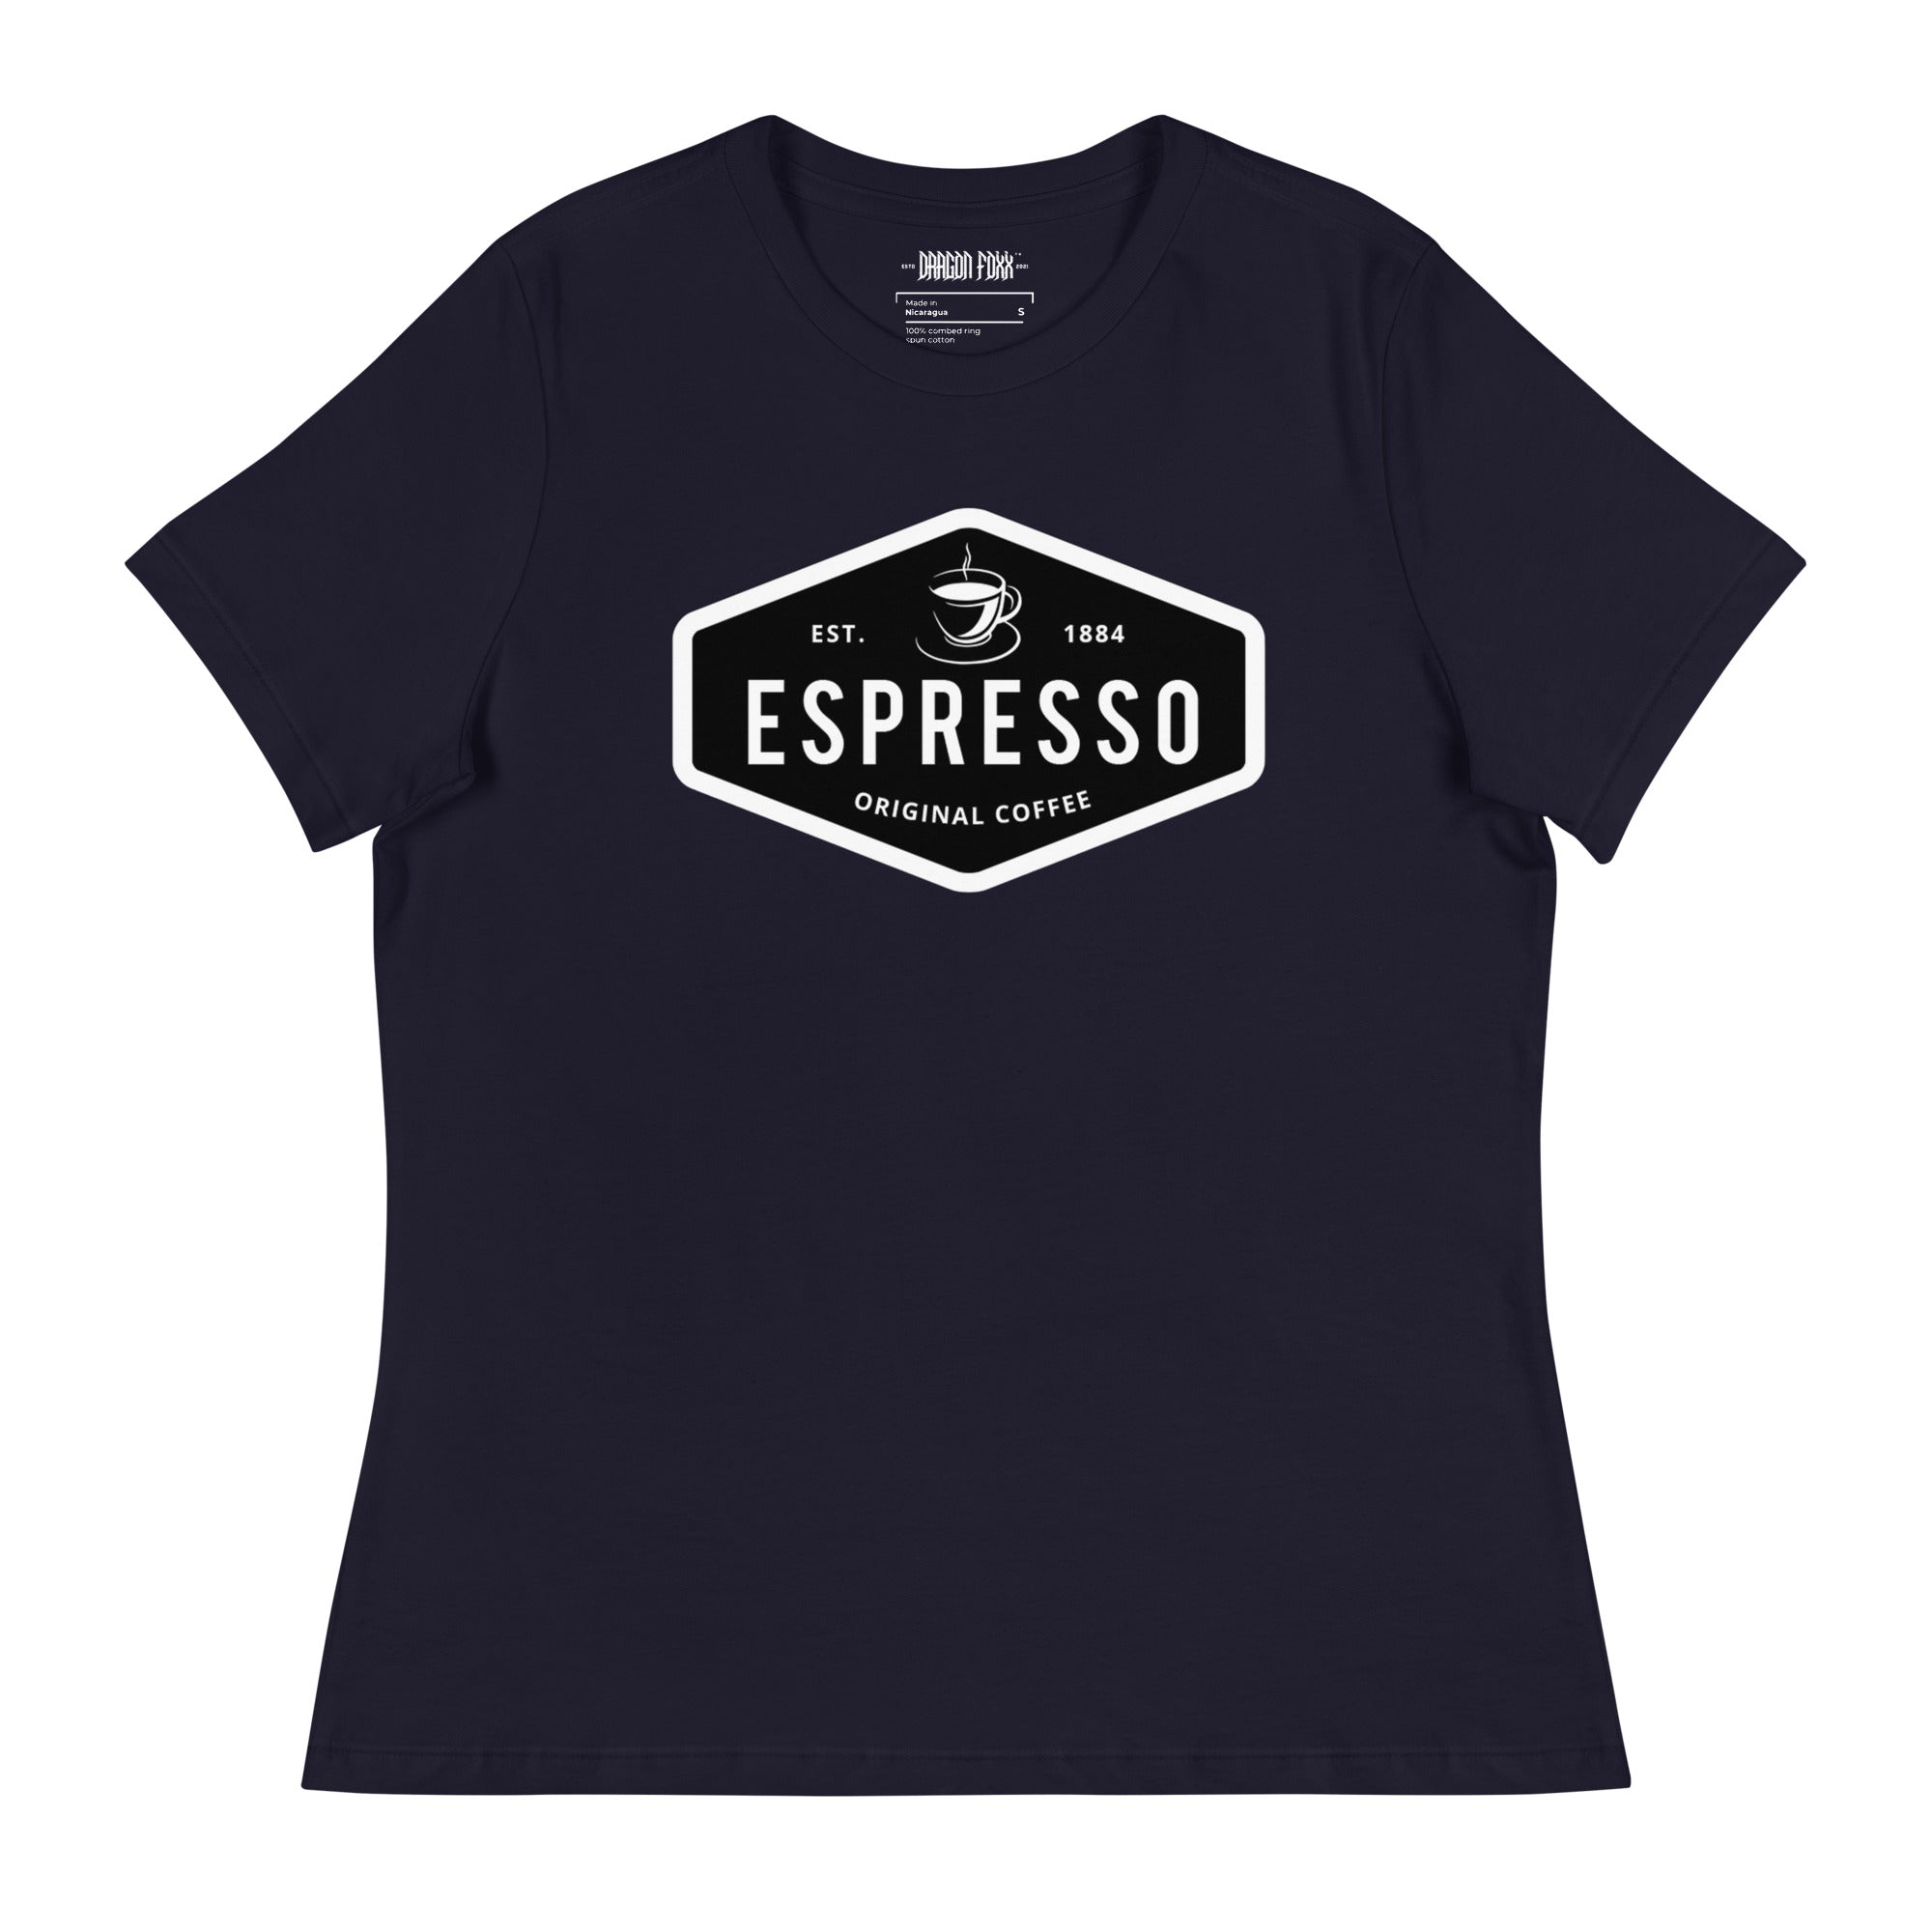 ESPRESSO - Women's Relaxed Fit Graphic T-Shirt in 16 Colors - Women's Relaxed Fit Graphic T-Shirt - DRAGON FOXX™ - 7218598_10235 - Navy - S - Athletic Heather T-shirt - Berry T-shirt - Black T-shirt